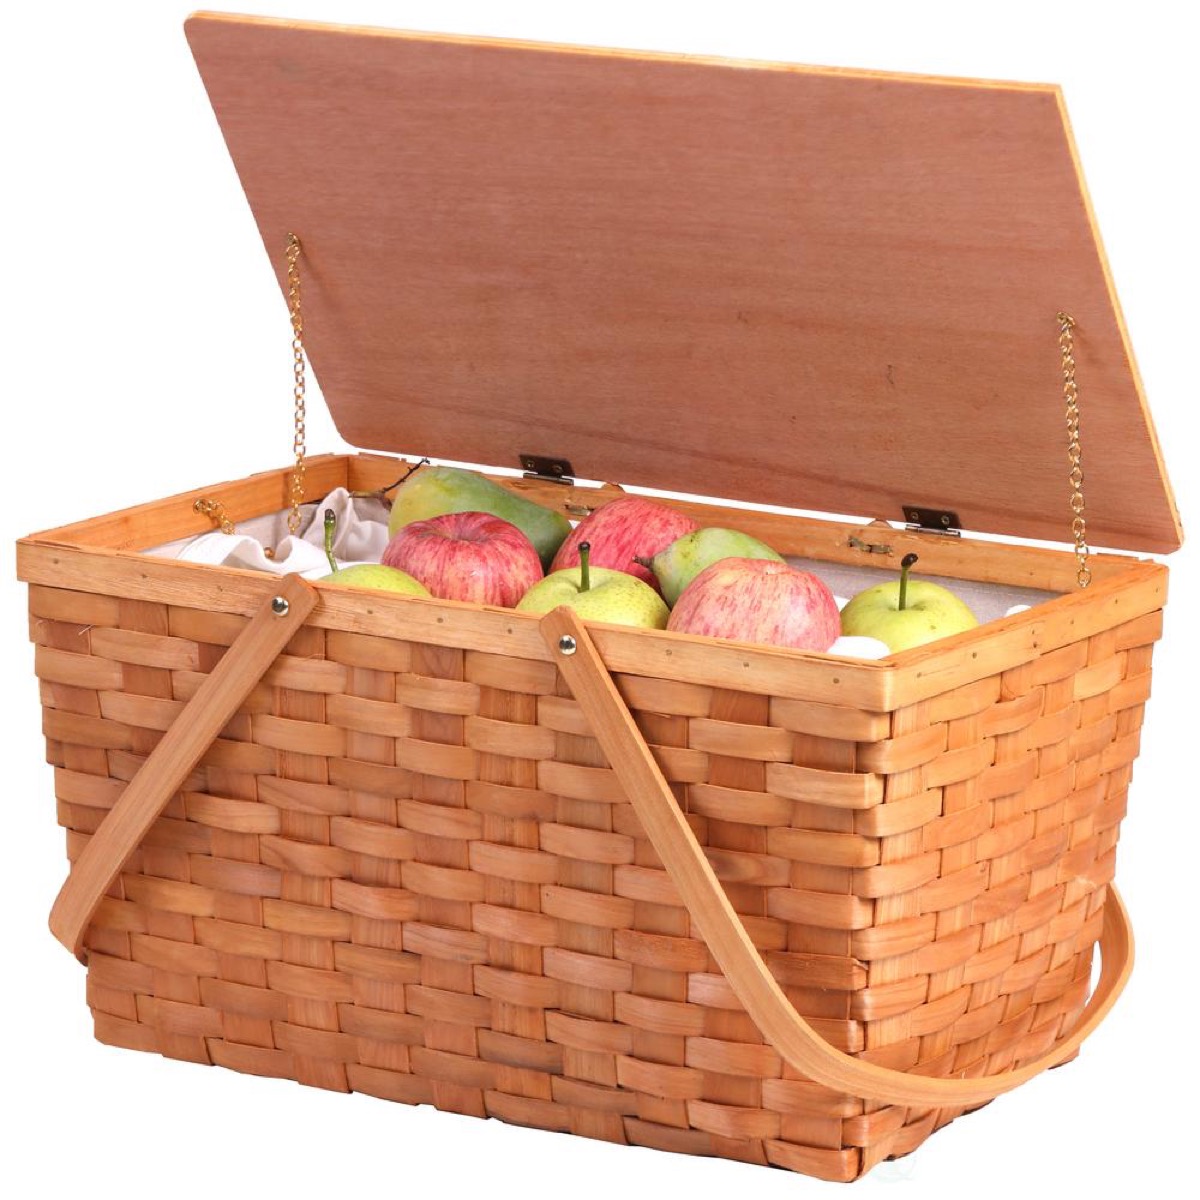 A Wooden Picnic Basket With Apples Walmart Shopping